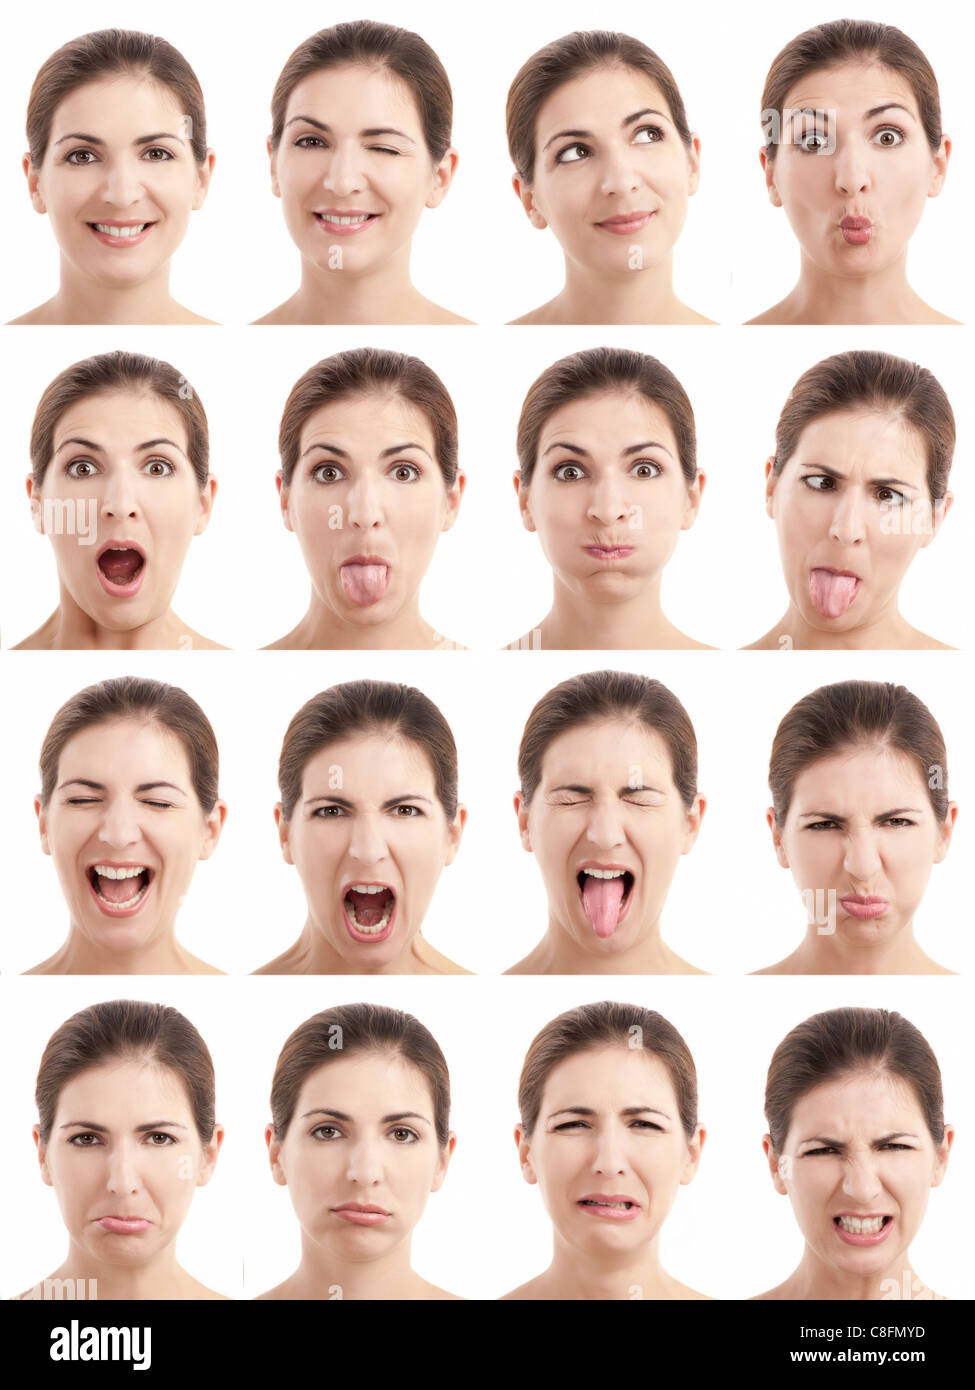 Multiple close-up portraits of the same woman expressing different emotions and expressions Stock Photo